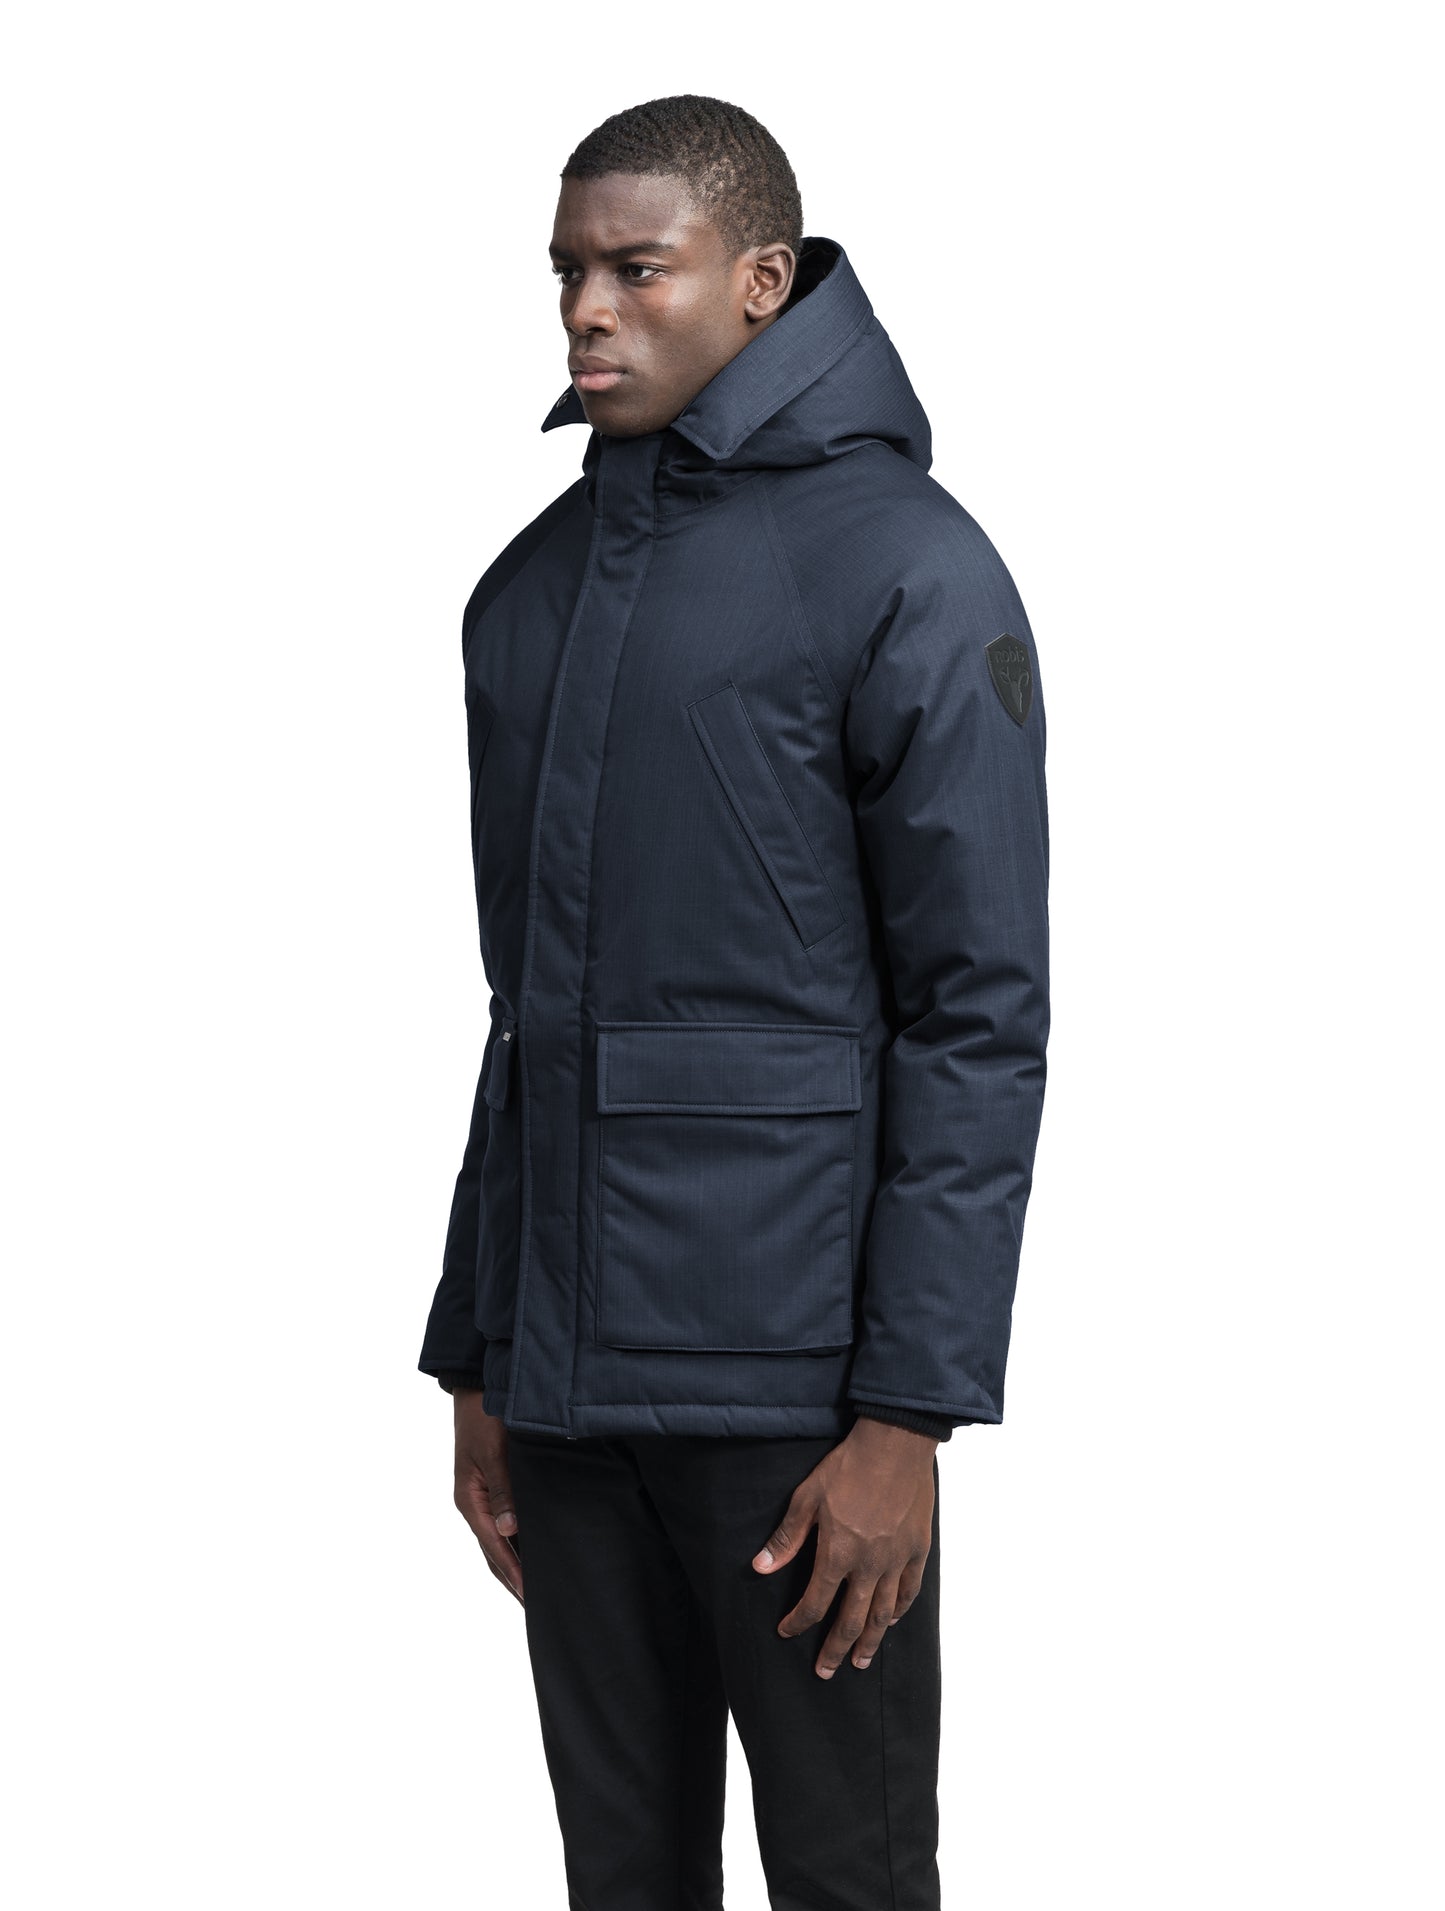 Heritage Furless Men's Parka in hip length, Canadian white duck down insulation, non-removable hood, front zipper with magnetic placket, chest hand warmer pockets, waist flap pockets, and elastic cuffs, in Navy